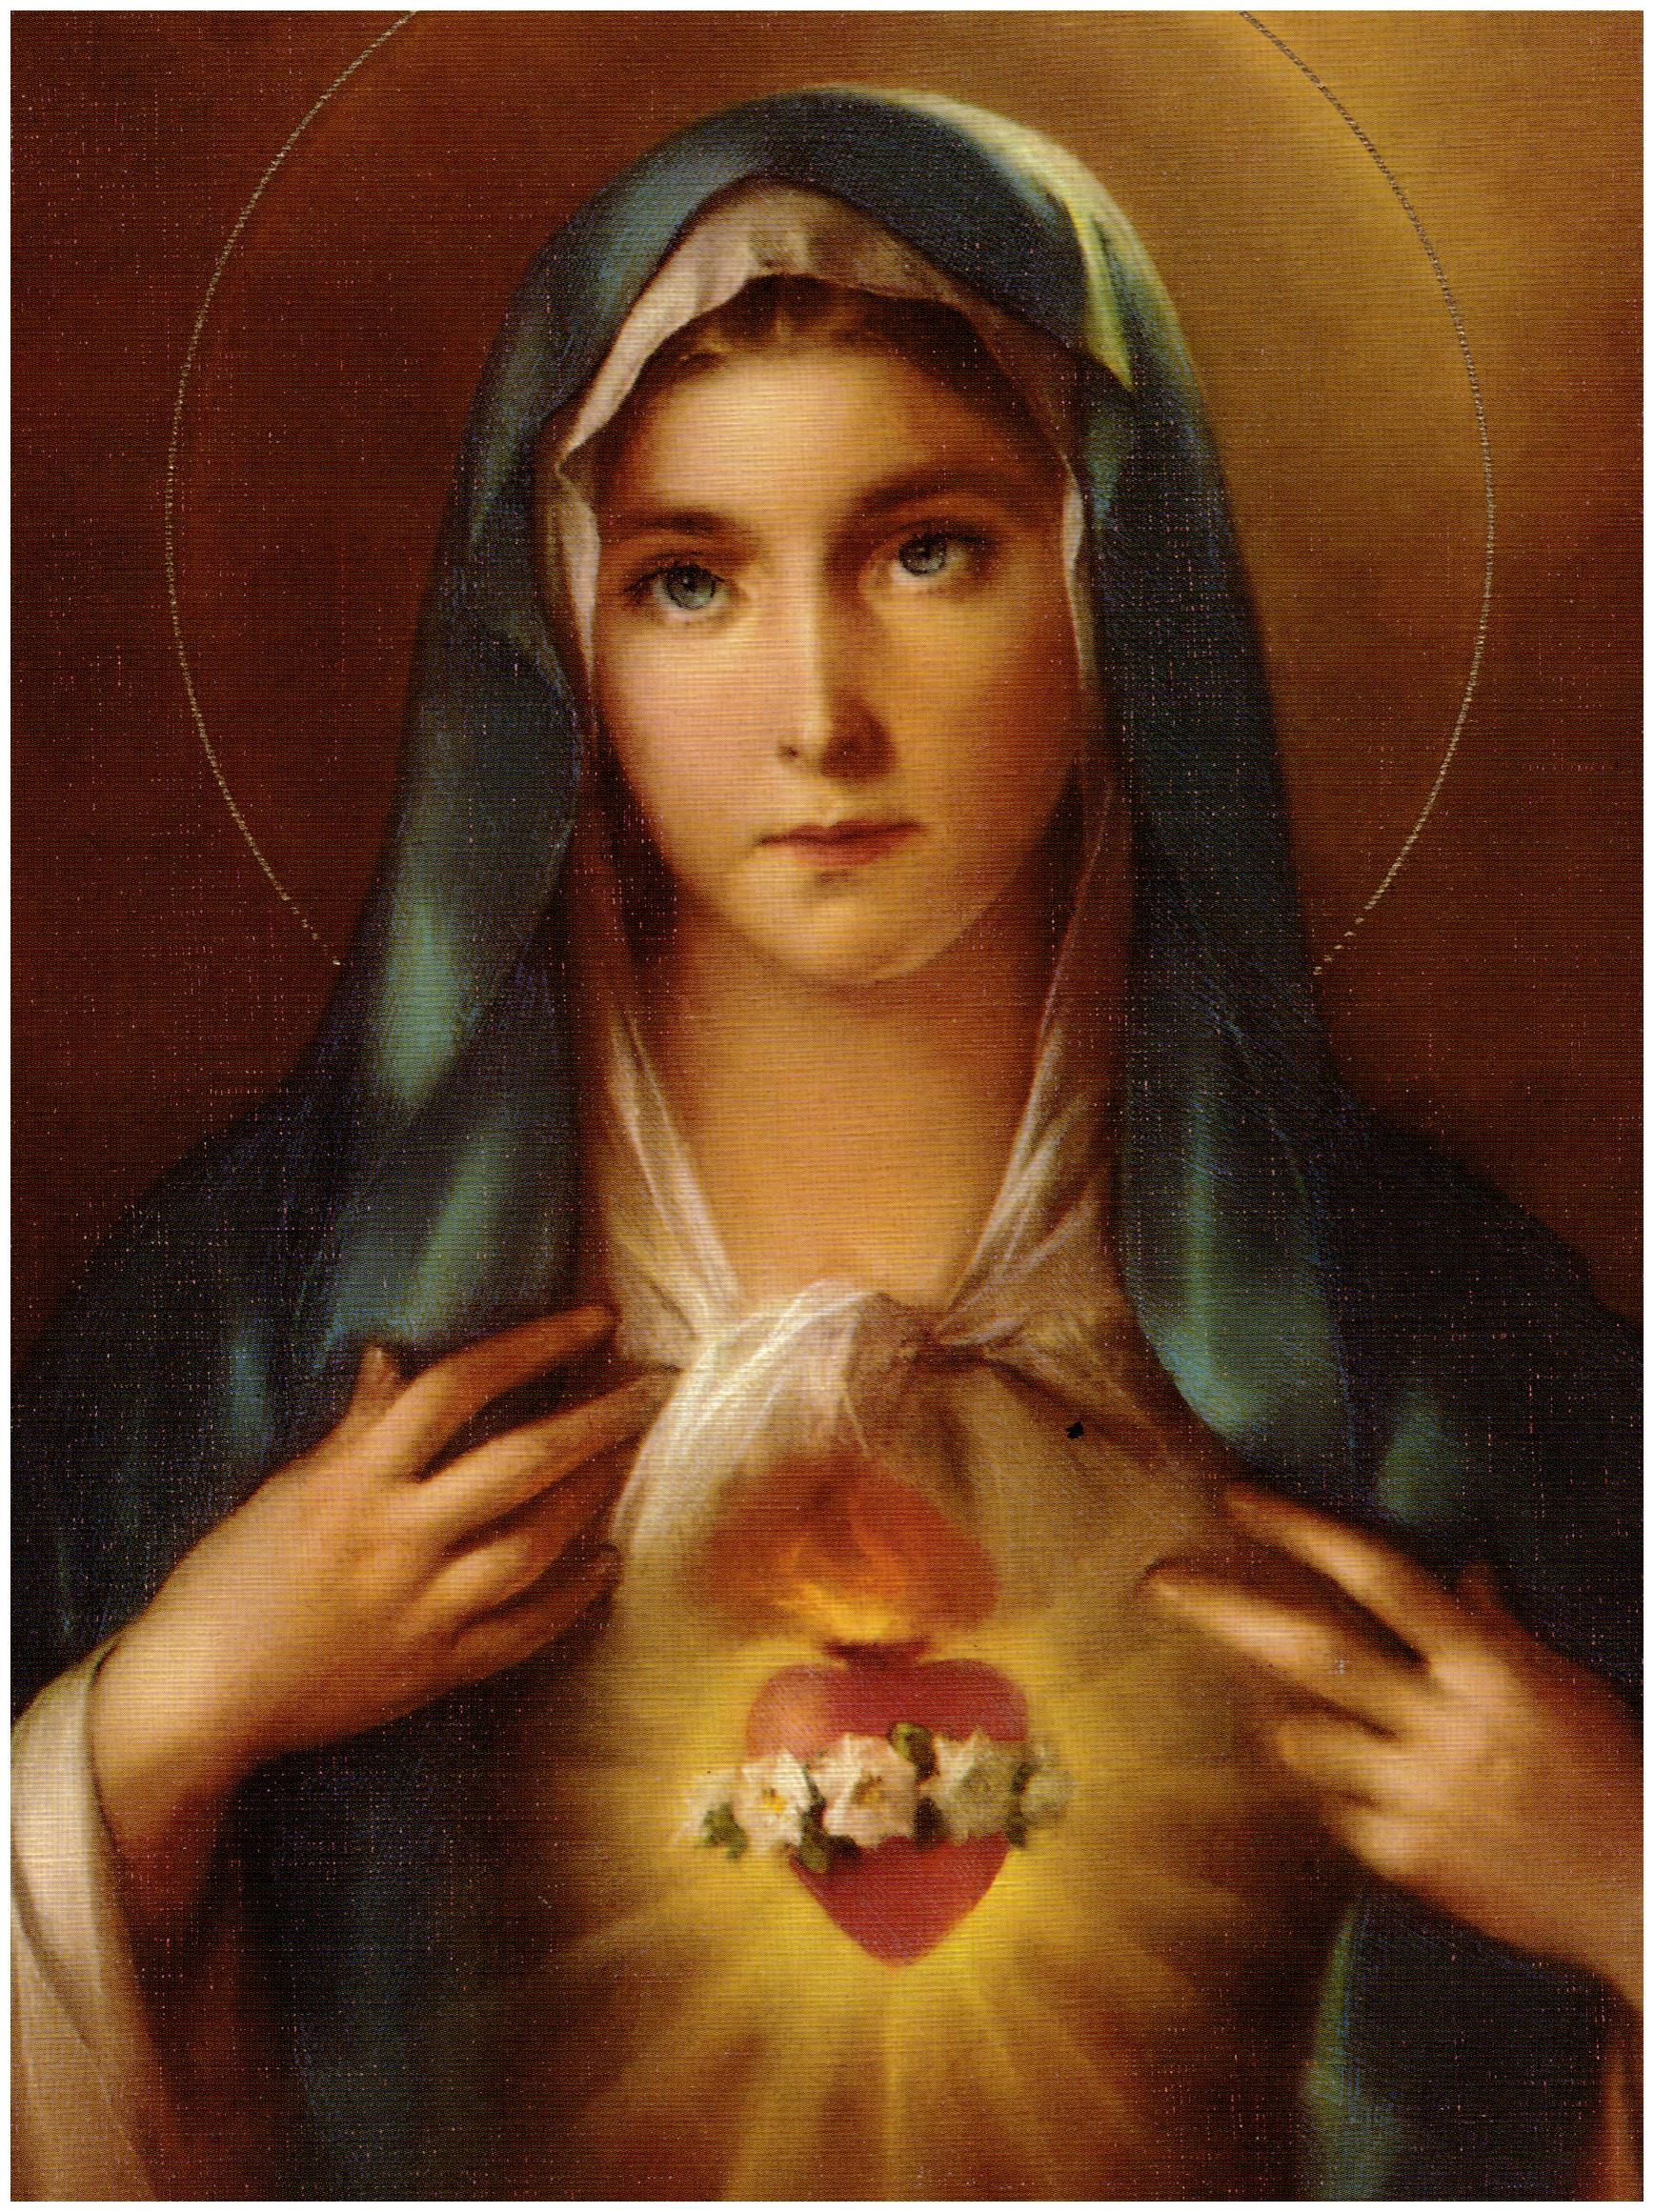 Immaculate Heart Of Mary Wallpapers Wallpaper Cave